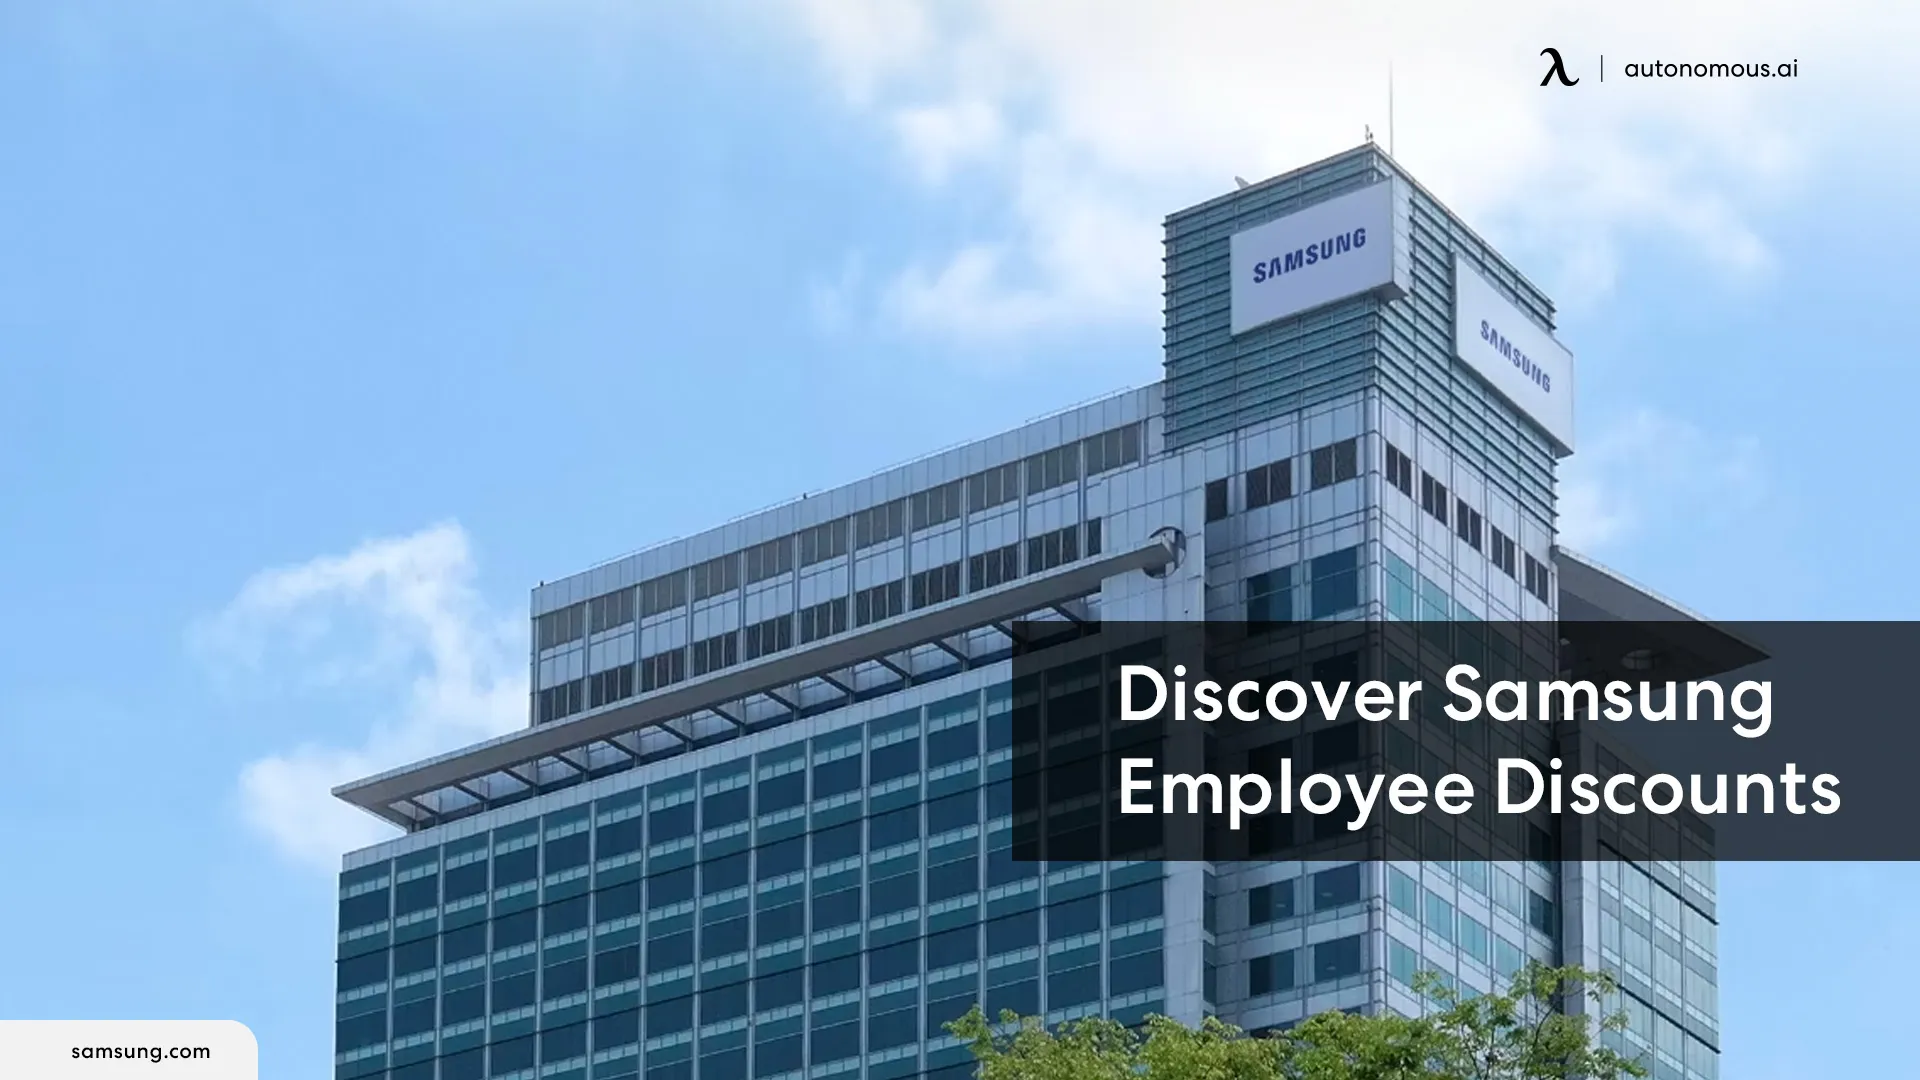 Everything You Need to Know about Employee Discounts at Samsung